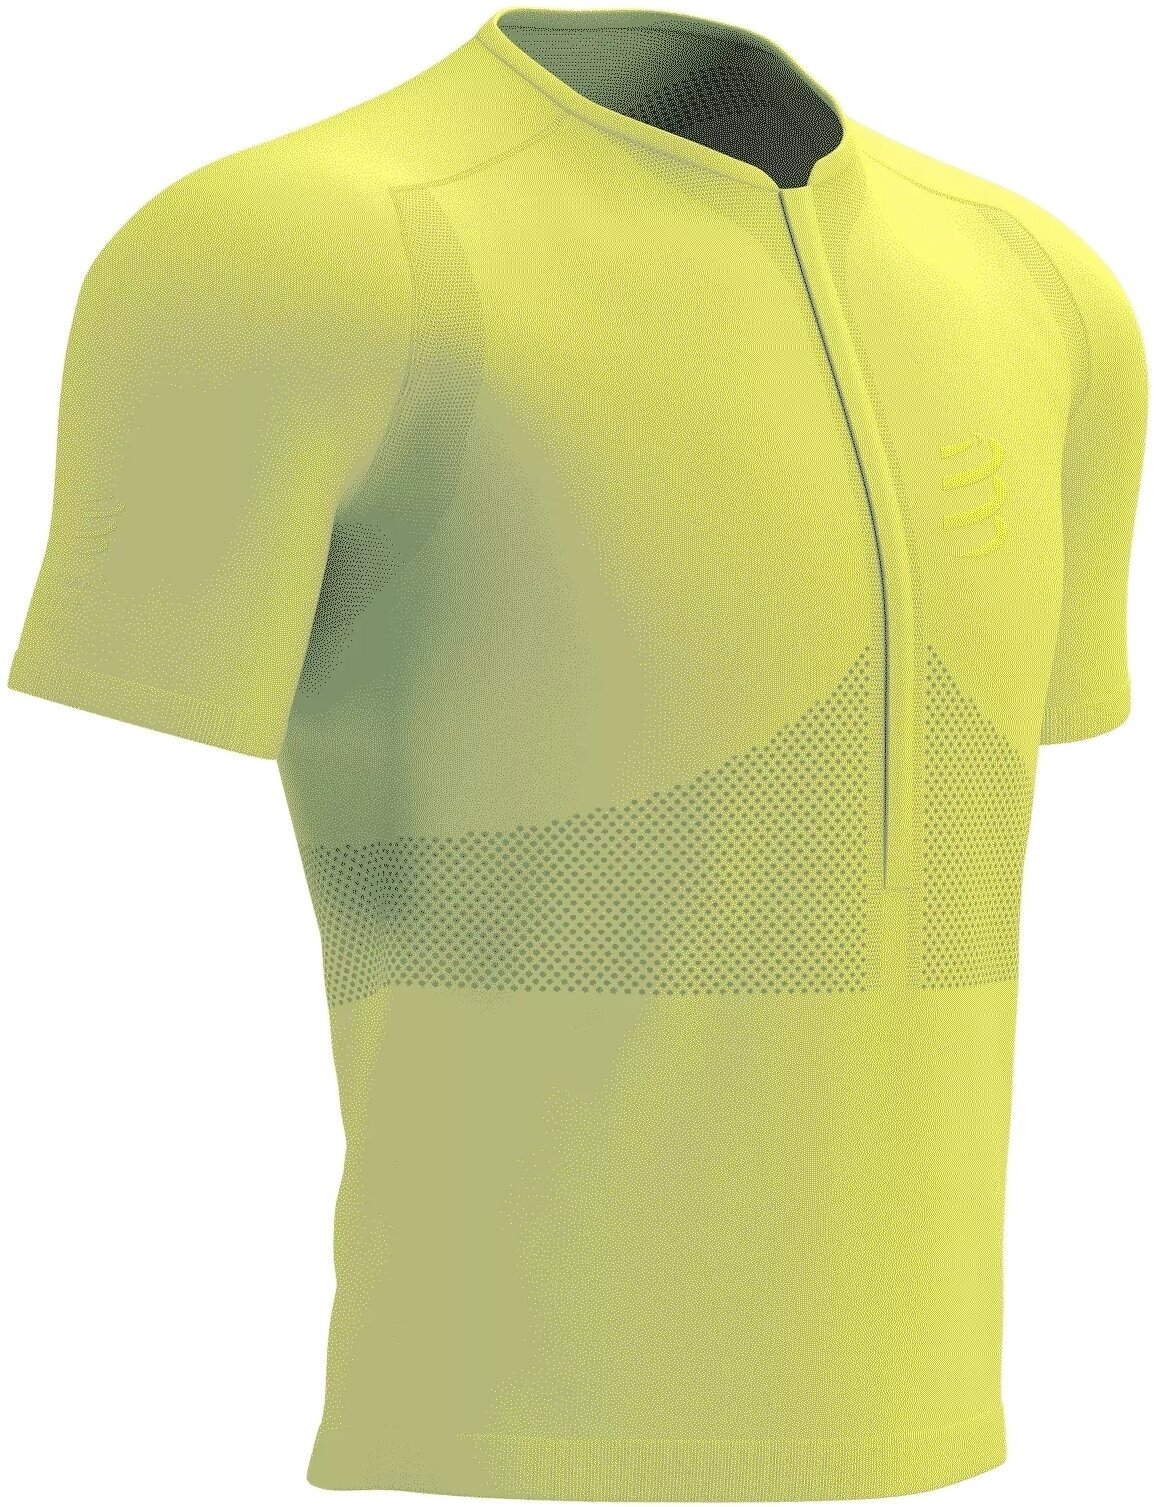 Running t-shirt with short sleeves
 Compressport Trail Half-Zip Fitted SS Top Green Sheen/Safety Yellow L Running t-shirt with short sleeves